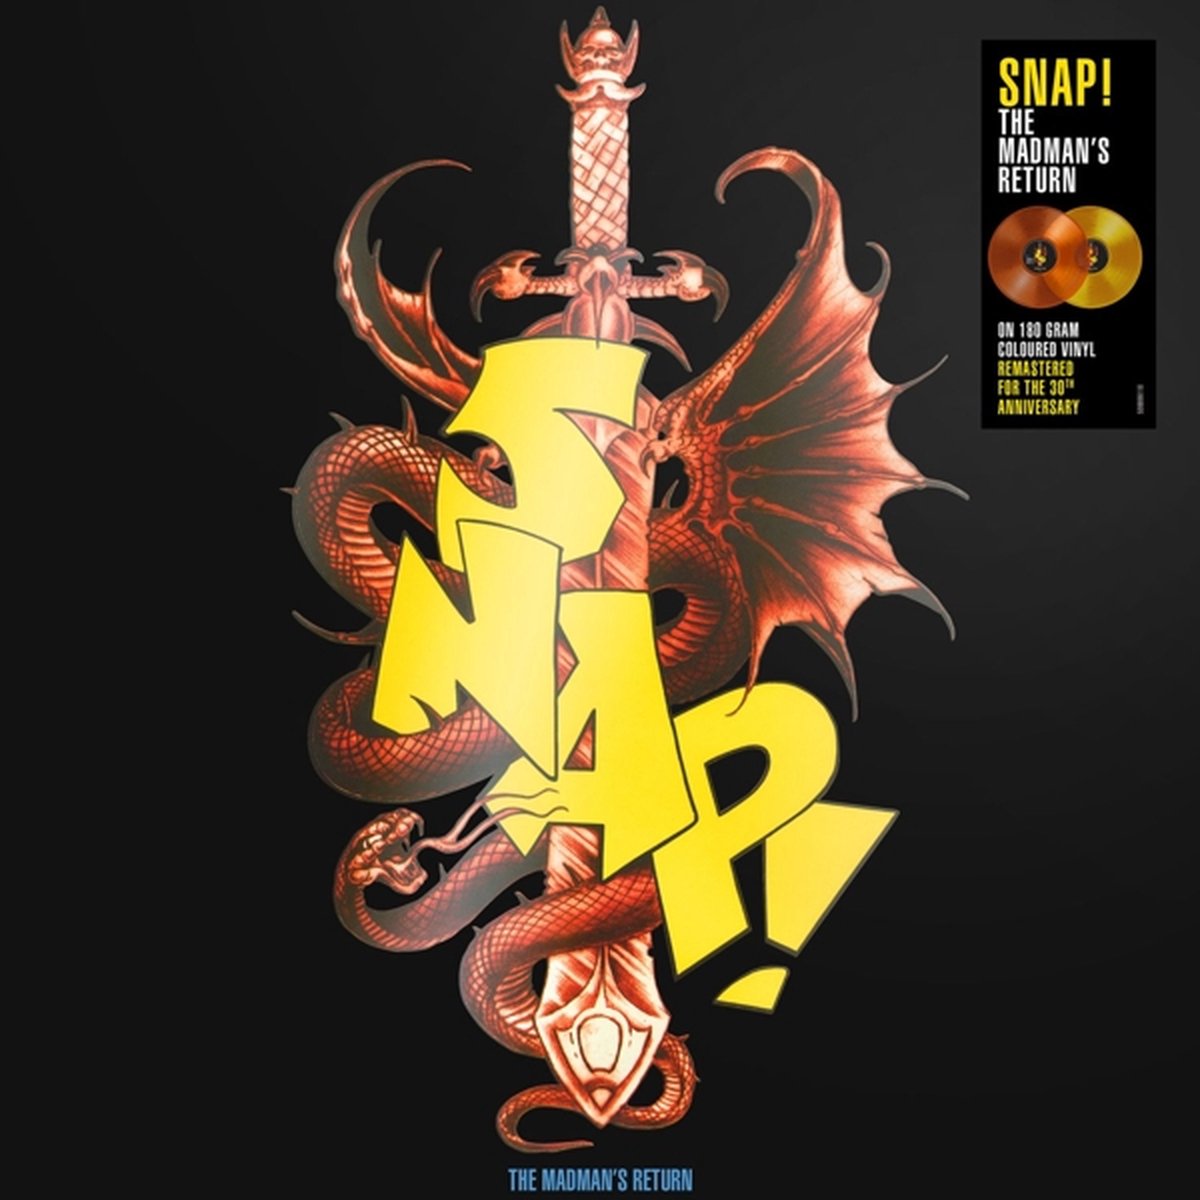 Snap! - The Madman's Return (Limited edition, transparent red & yellow vinyl) (2LP)